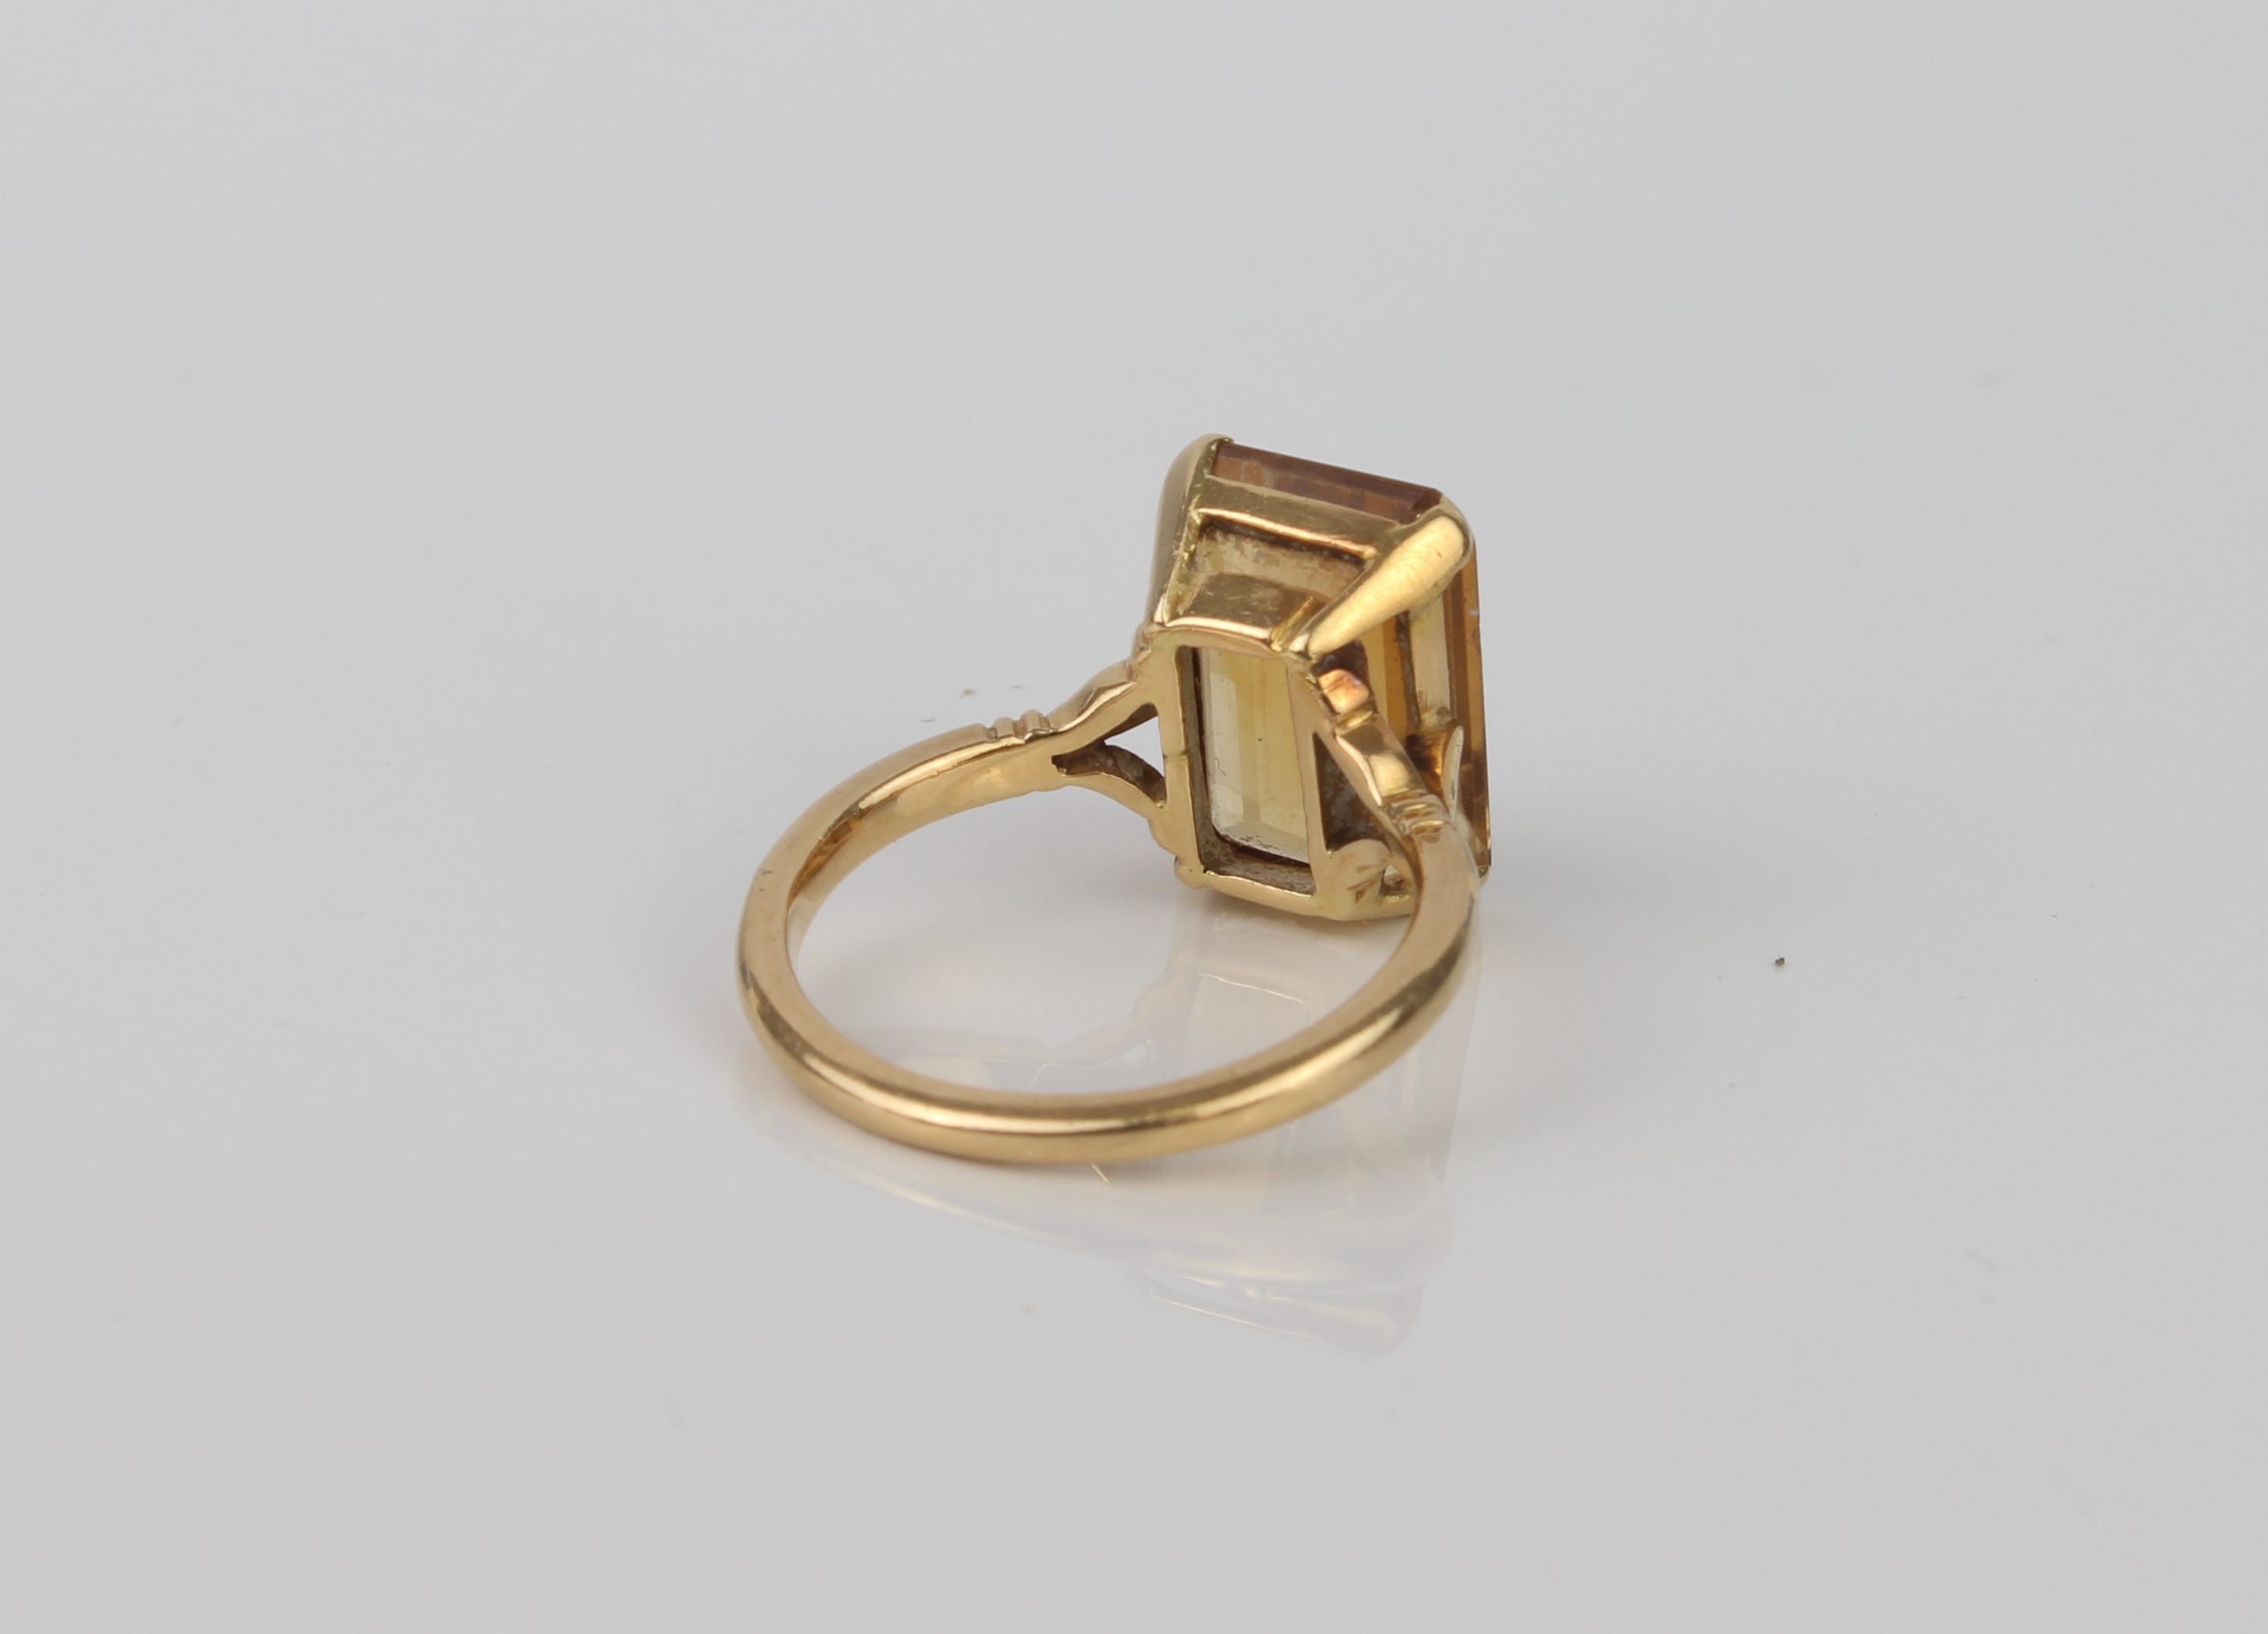 An 18ct yellow gold and yellow stone ring - unmarked, tests as 18ct gold, probably yellow - Bild 4 aus 4